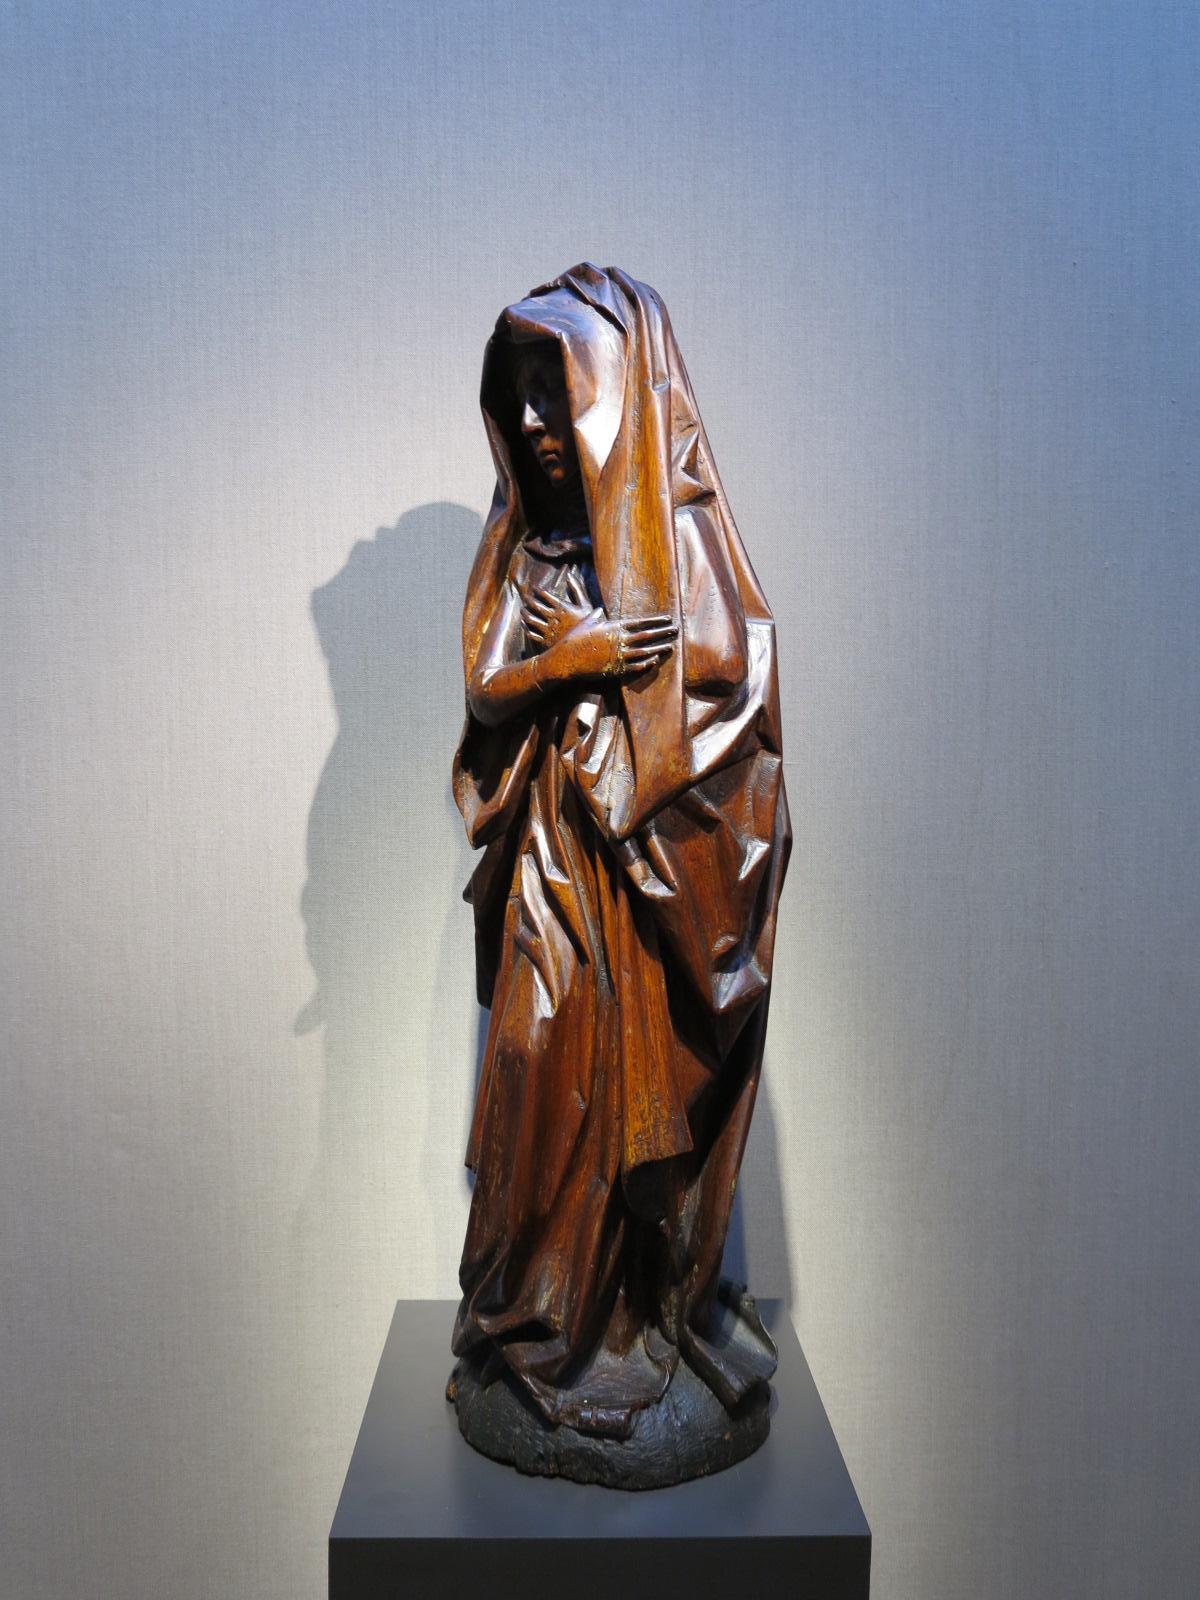 Late 15th-century Old Master Burgundian Netherlands carved walnut figure  - Brown Figurative Sculpture by Unknown